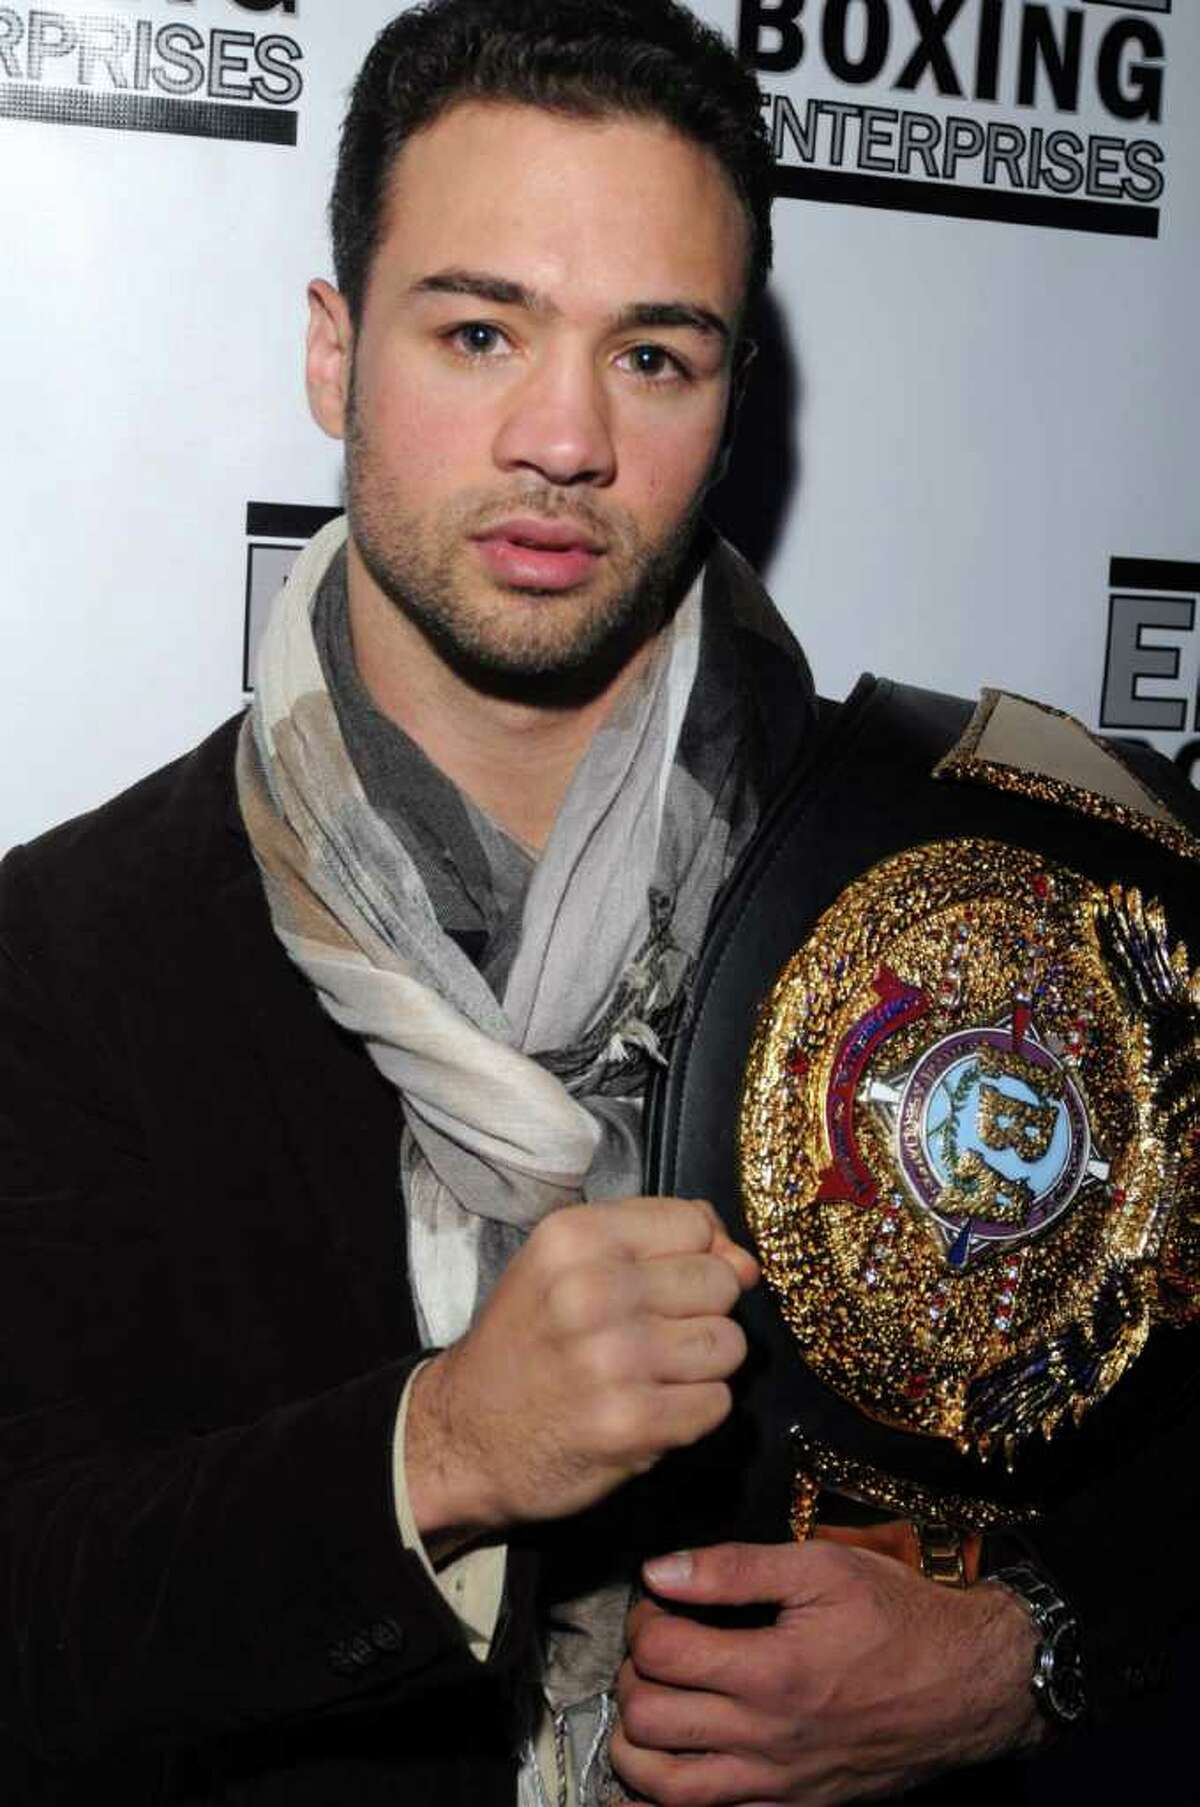 A reception was held at Danbury Billiards on Federal RD on Thursday Dec. 22, 2011 for Danbury boxer, Delvin Rodriguez, who captured the IBA Intercontinental title in the Junior Middleweight Division on Dec. 3 at Madison Square Garden.